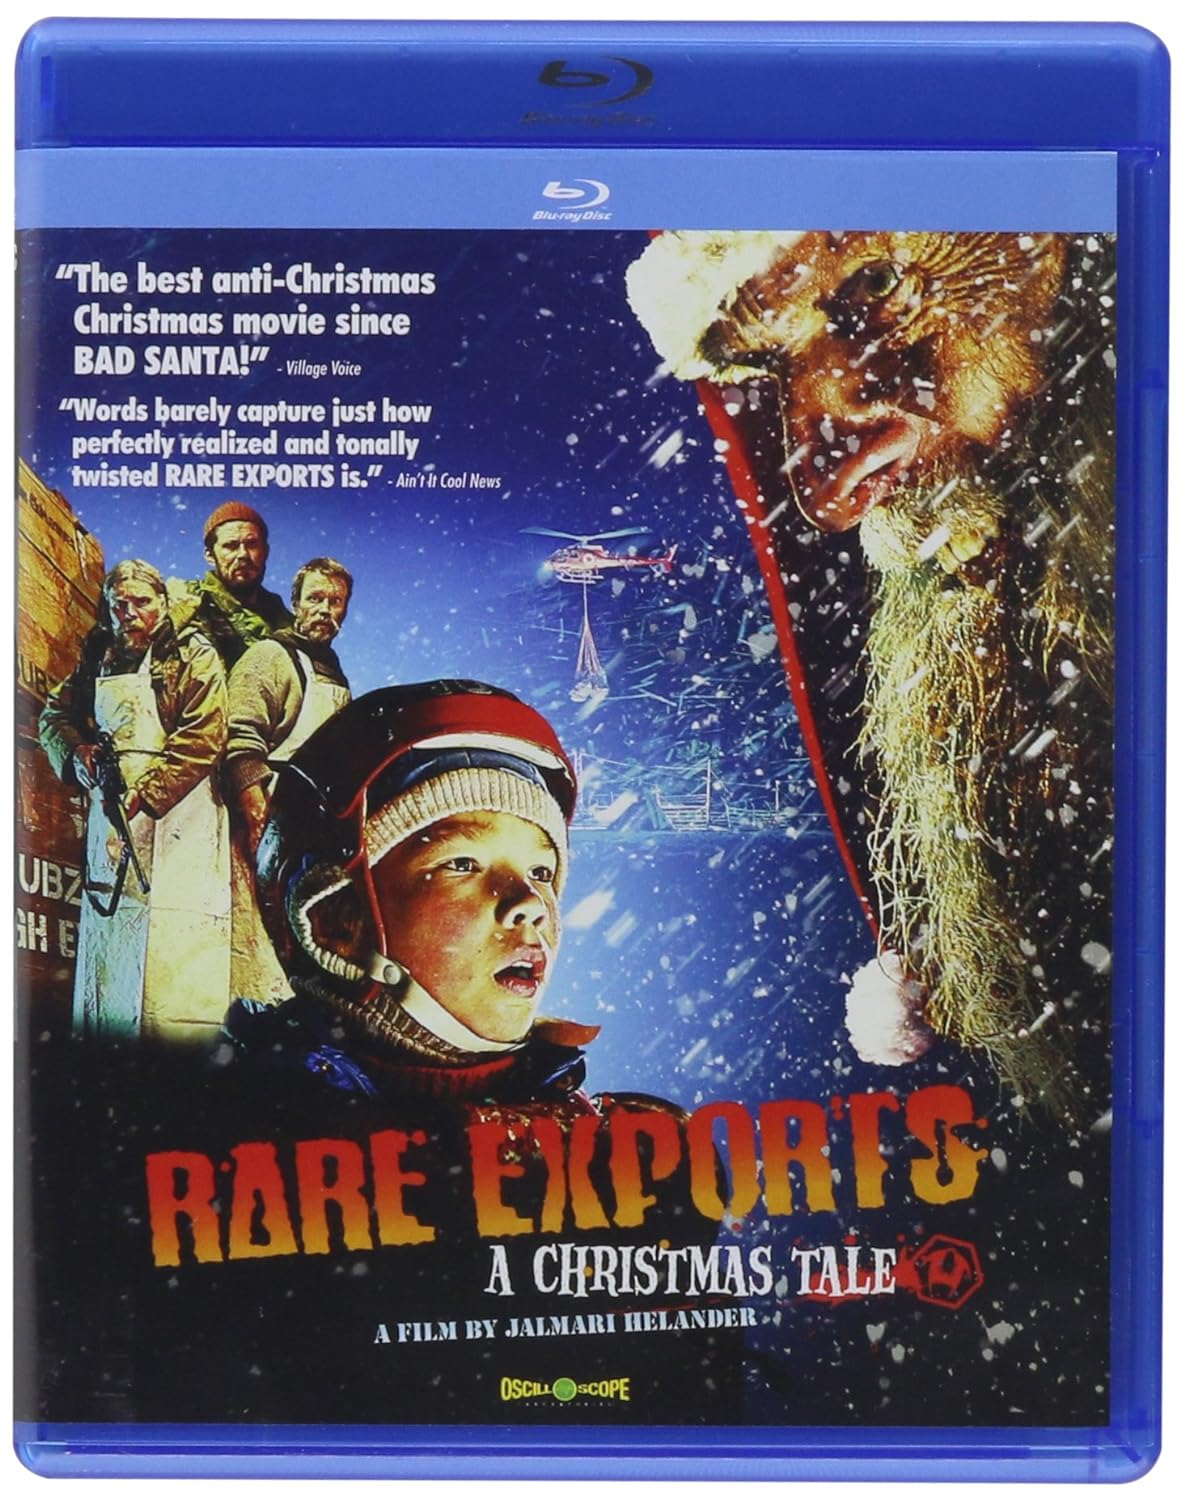 RARE EXPORTS: A CHRISTMAS TALE (2010)